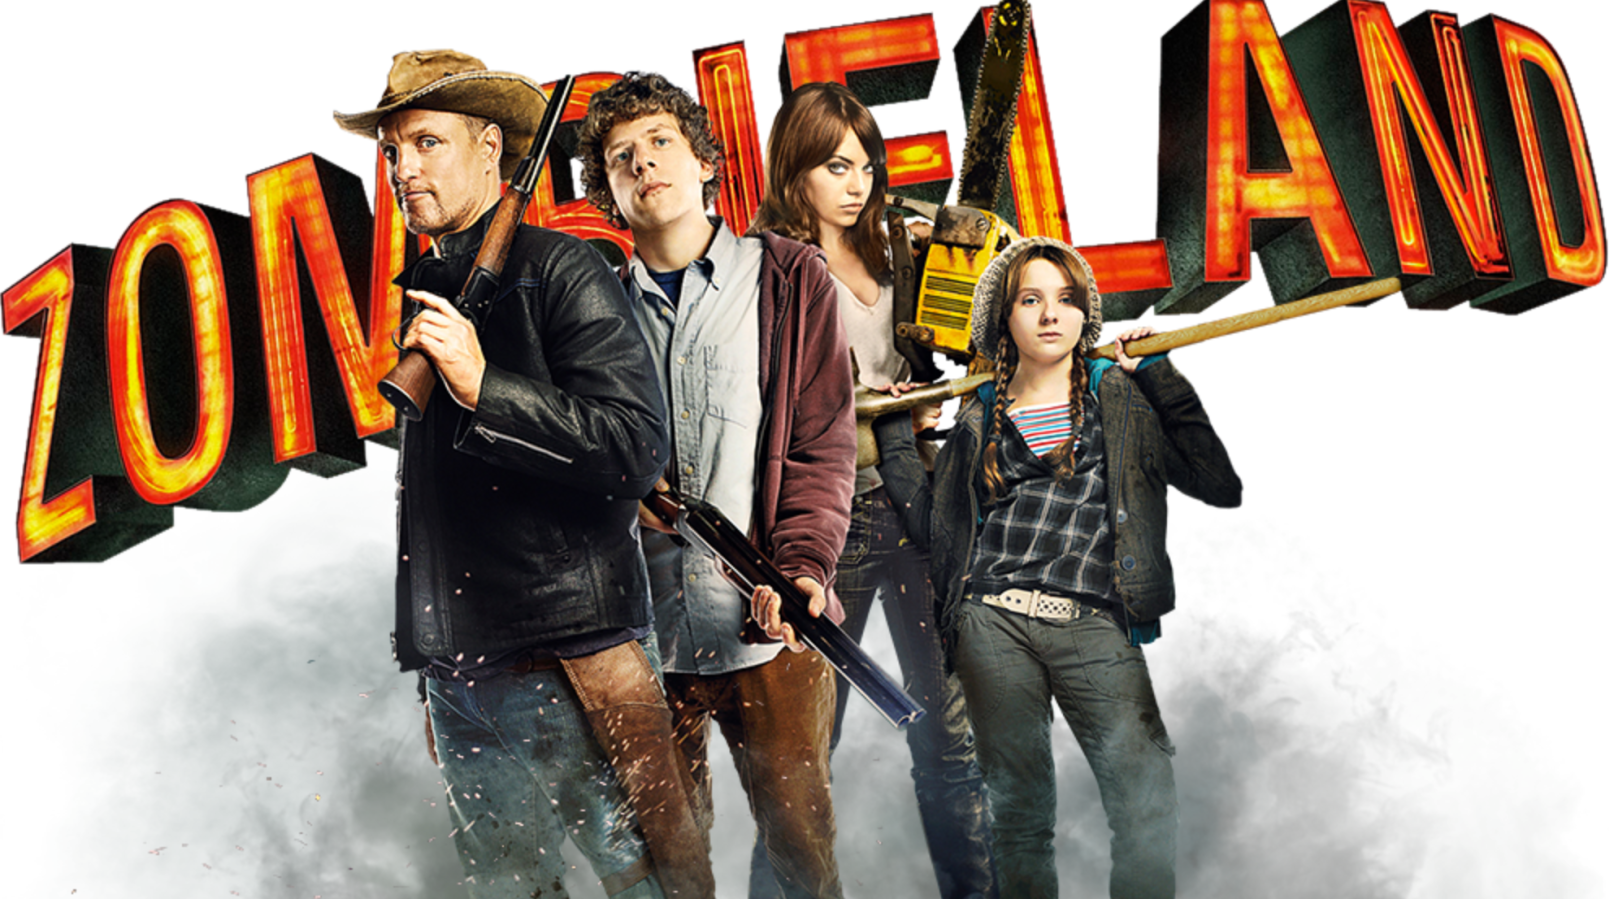 Zombieland: Double Tap Wallpapers